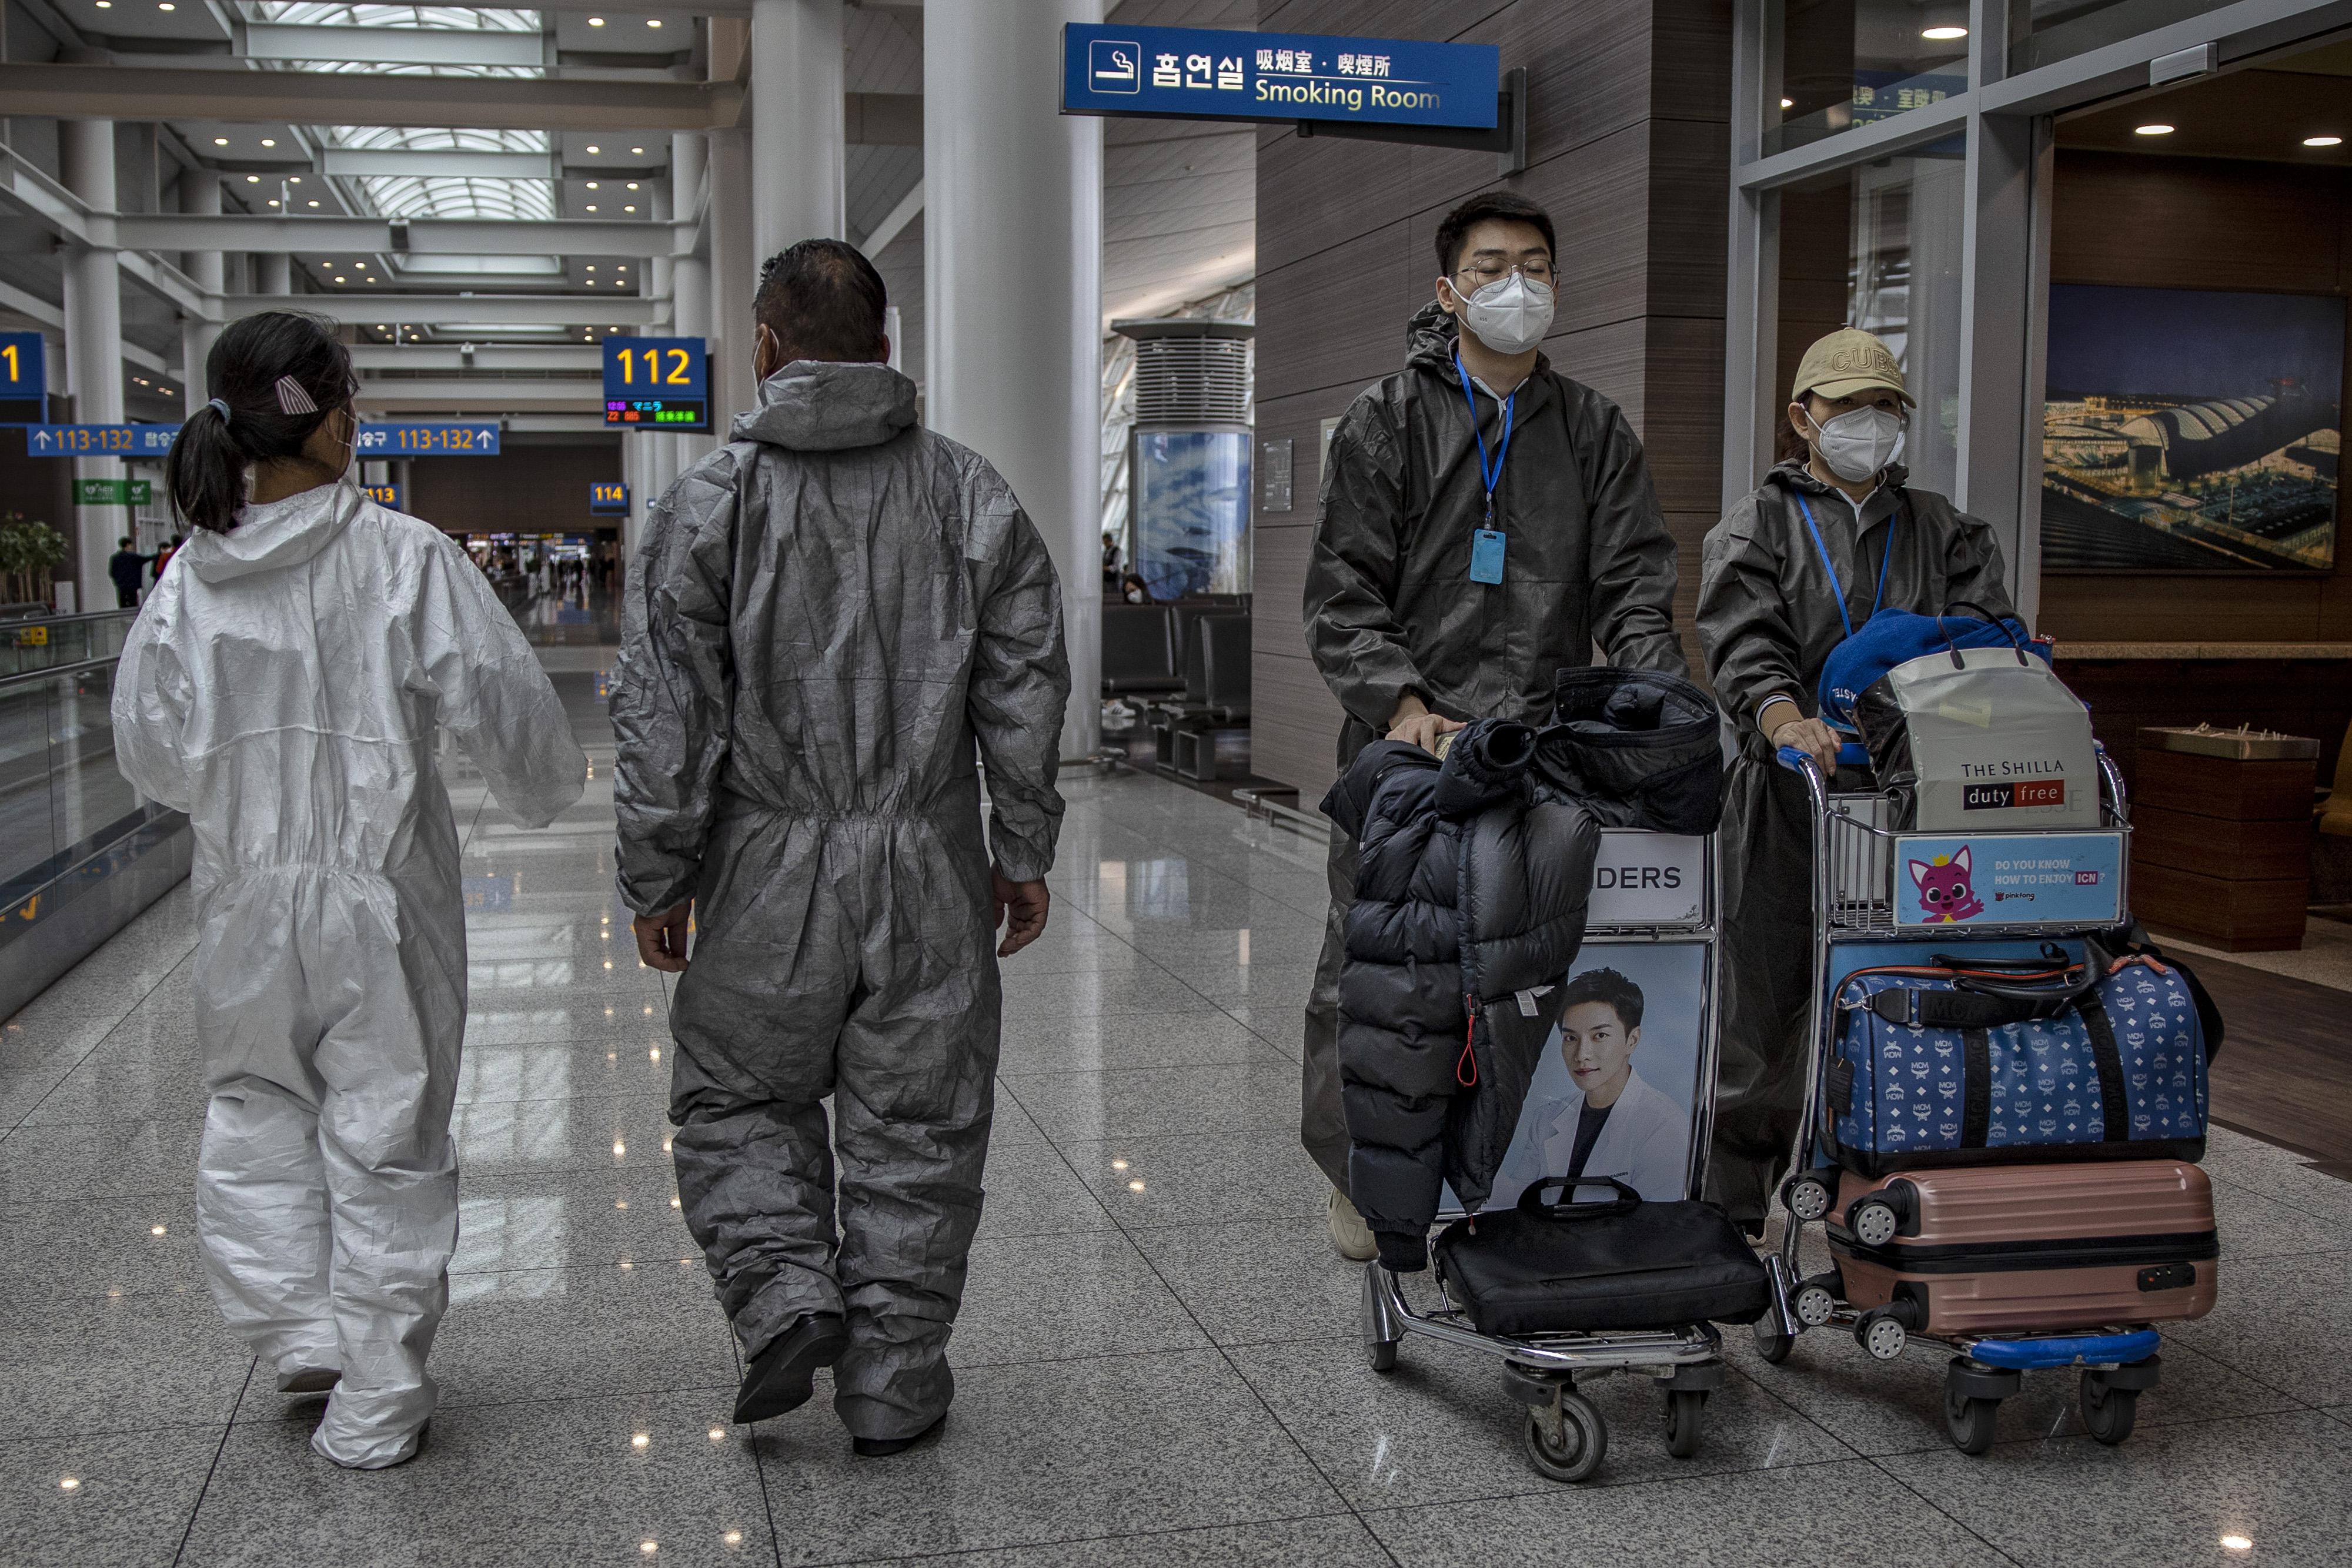 People wearing protective suits and face masks walk in the airport